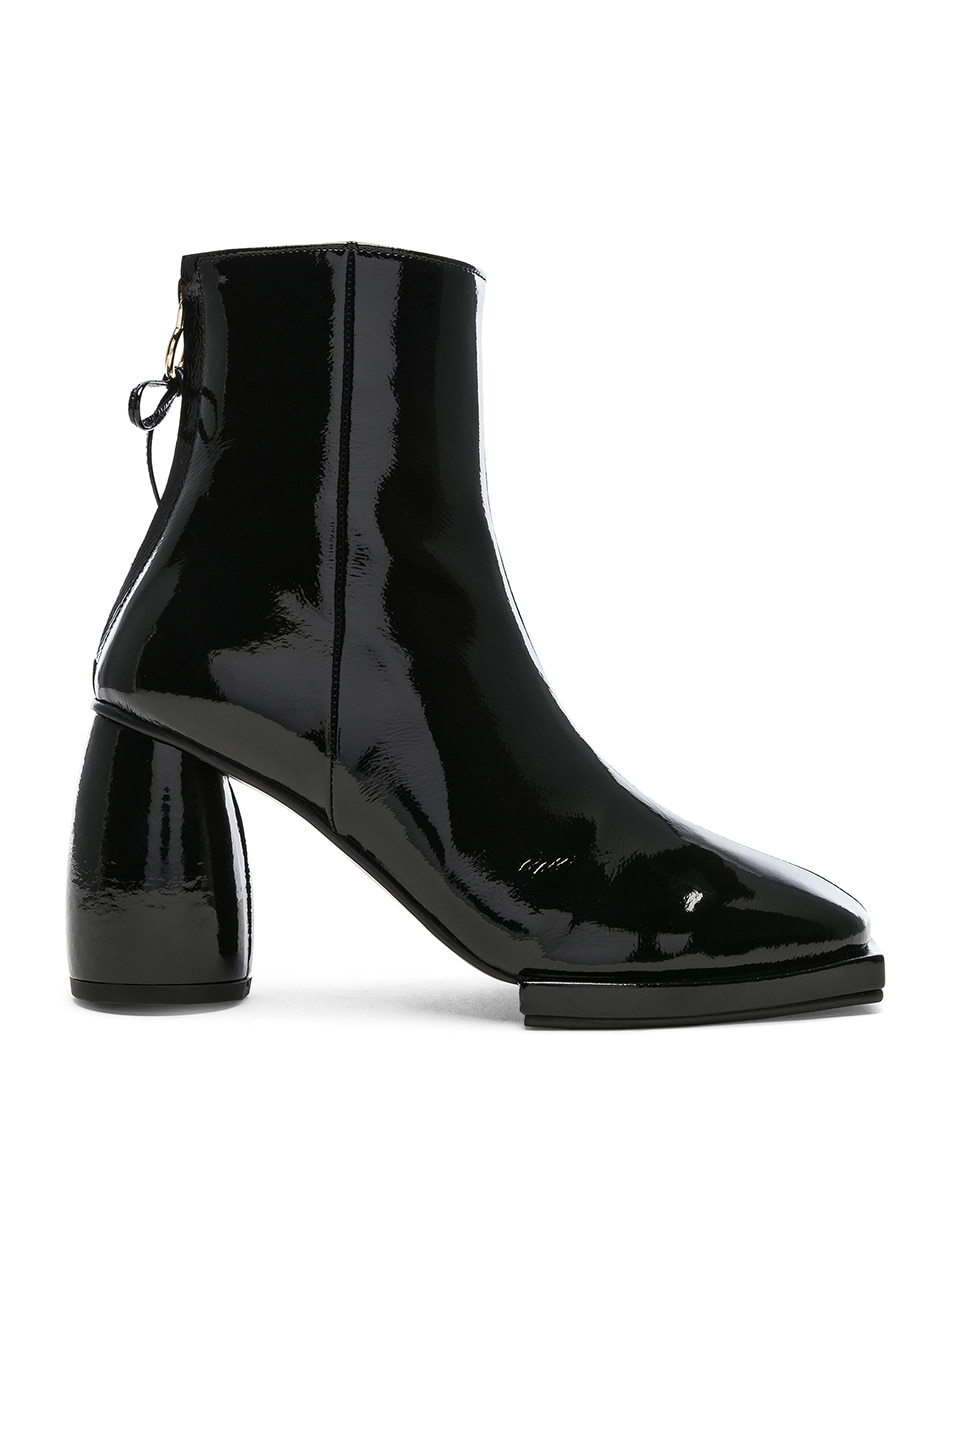 Image 1 of Reike Nen Patent Leather Square Ribbon Half Boots in Black